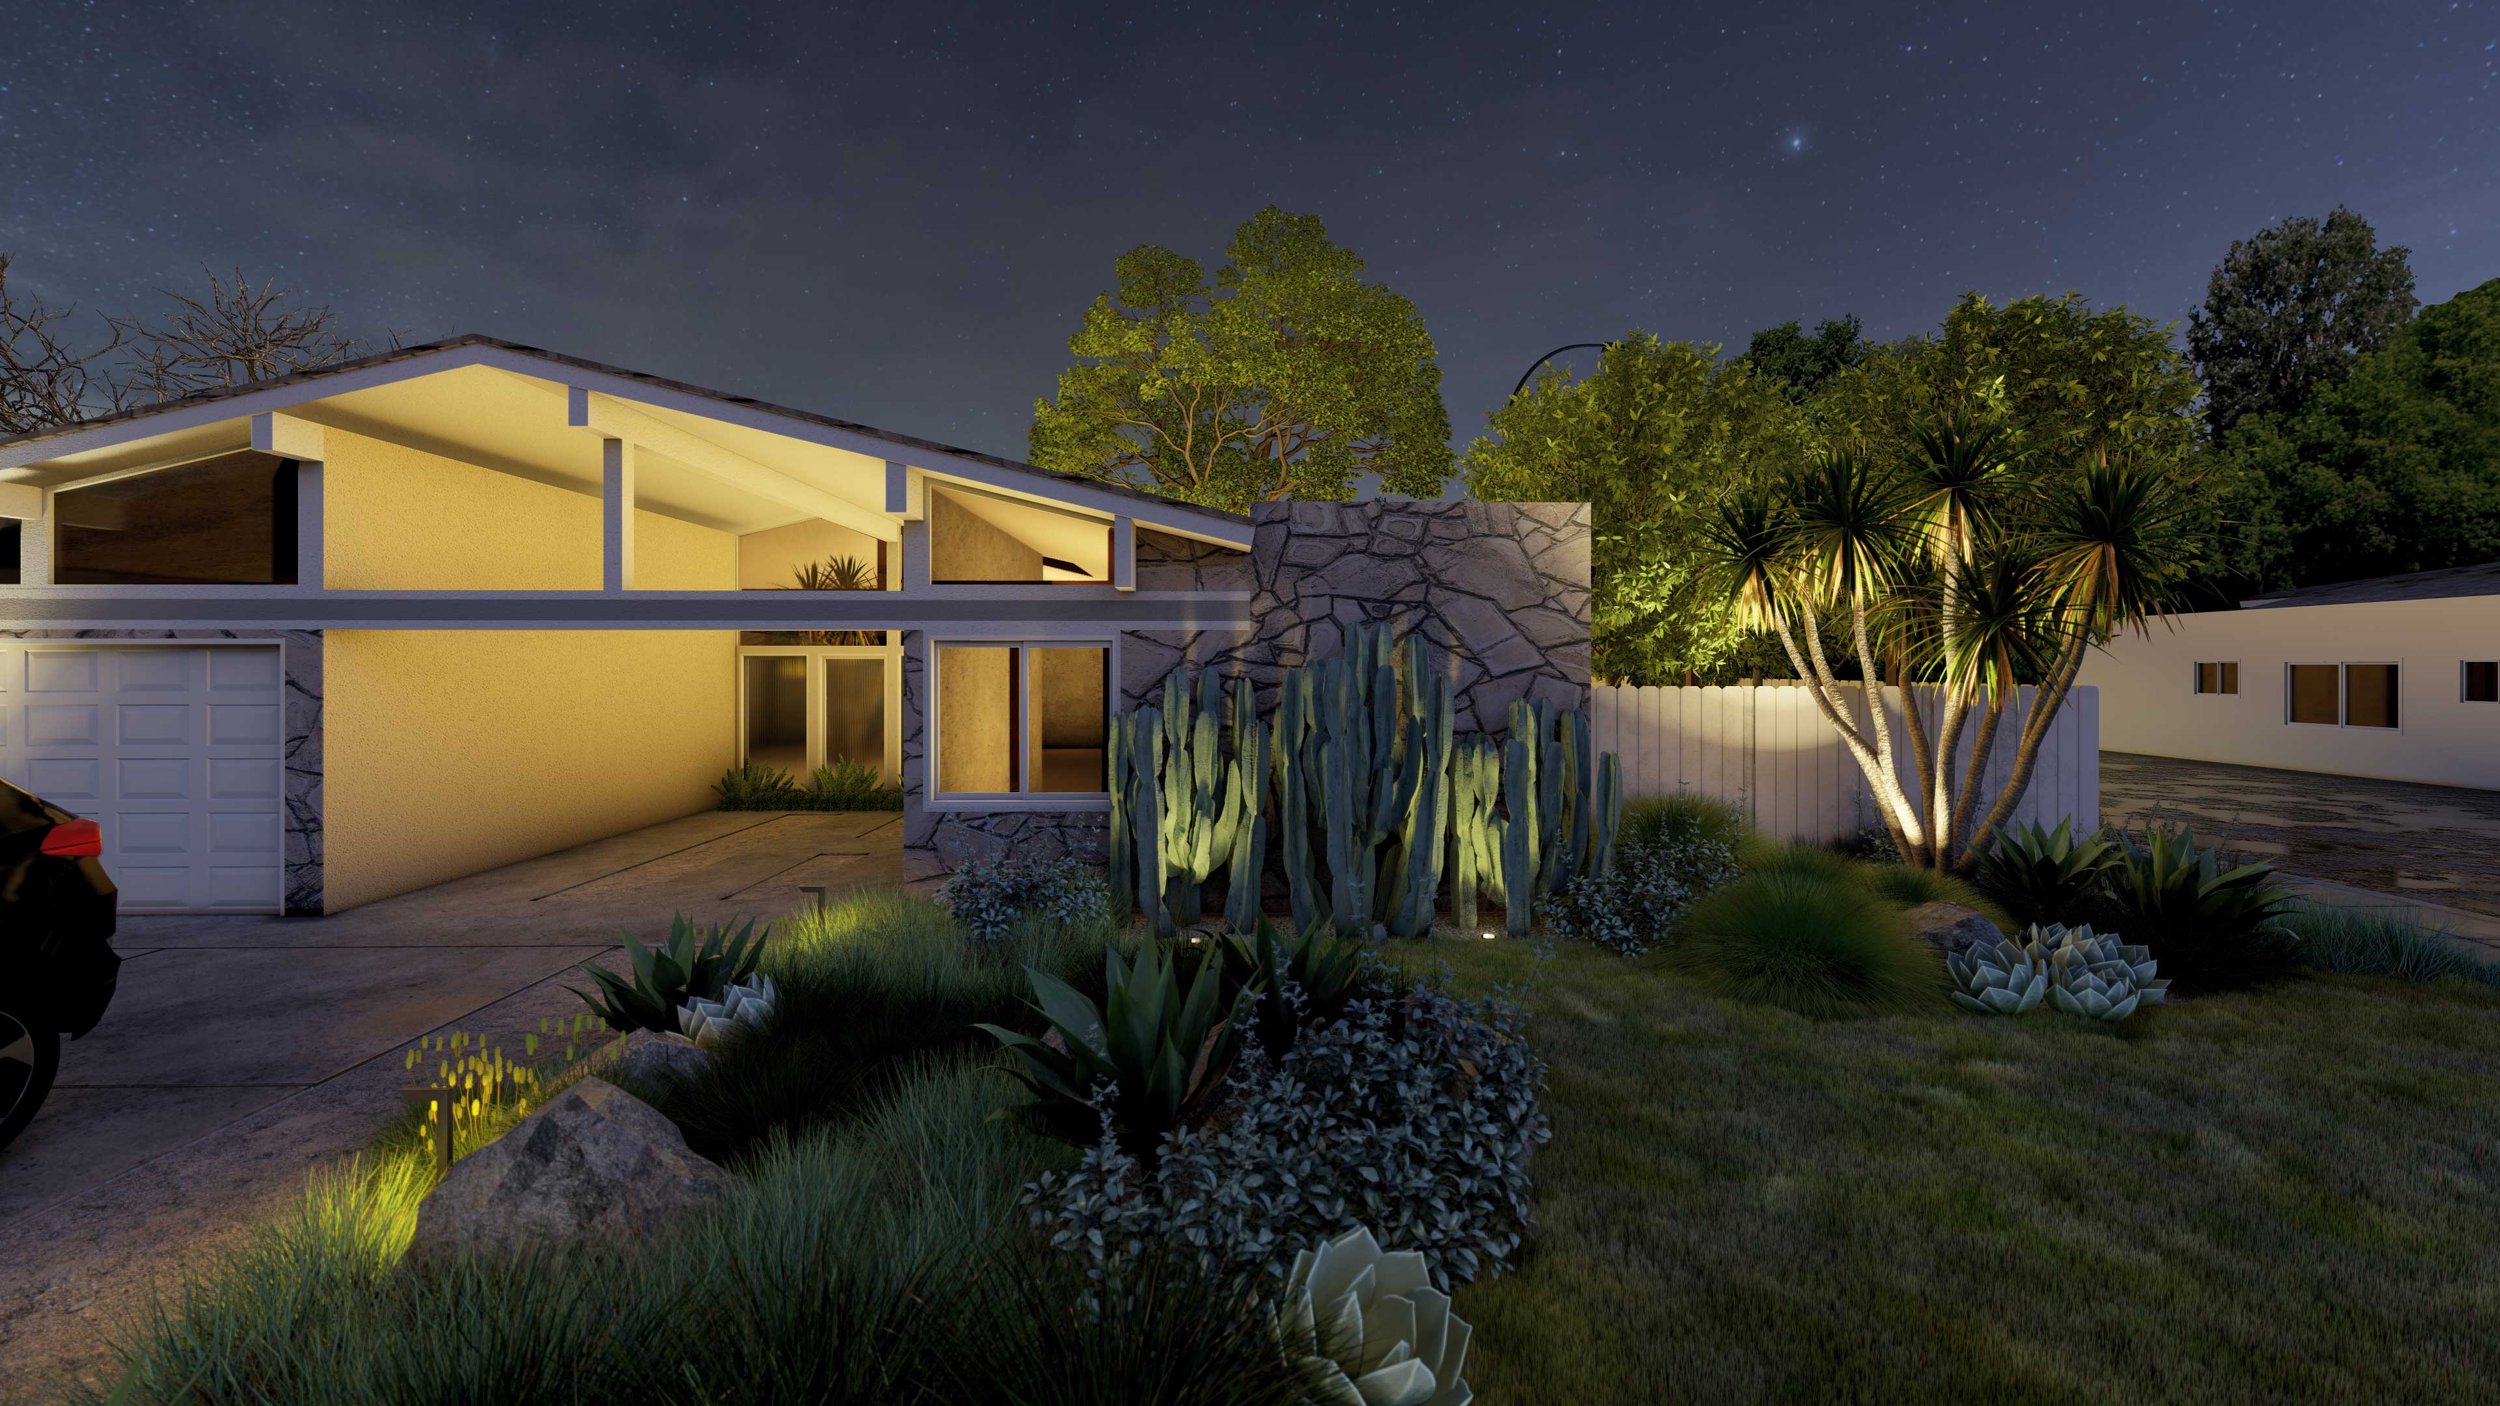  Uplighting takes full advantage of the Yucca and Candelabra Cactus - just be sure to turn the lights off when you go to bed to avoid disrupting the local ecosystem. 